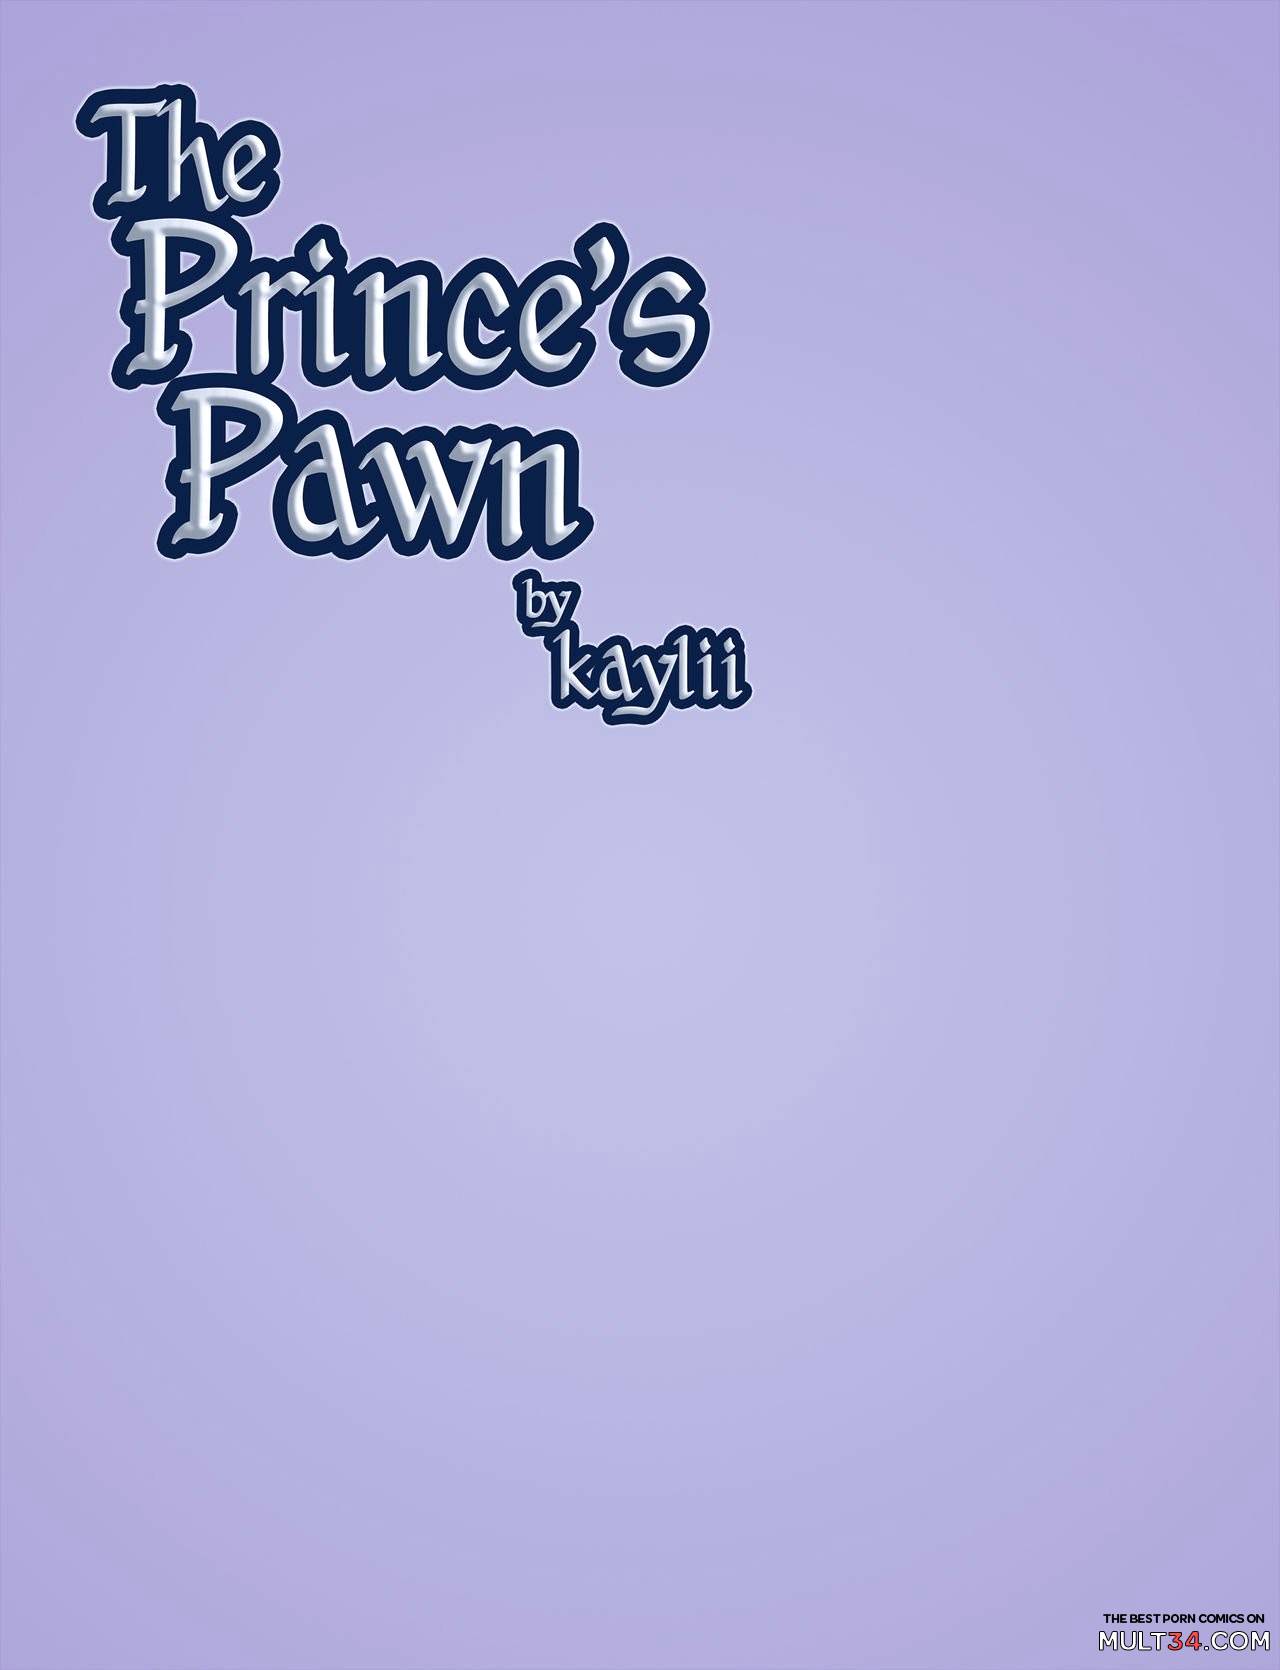 The Prince's Pawn (New Version) page 2